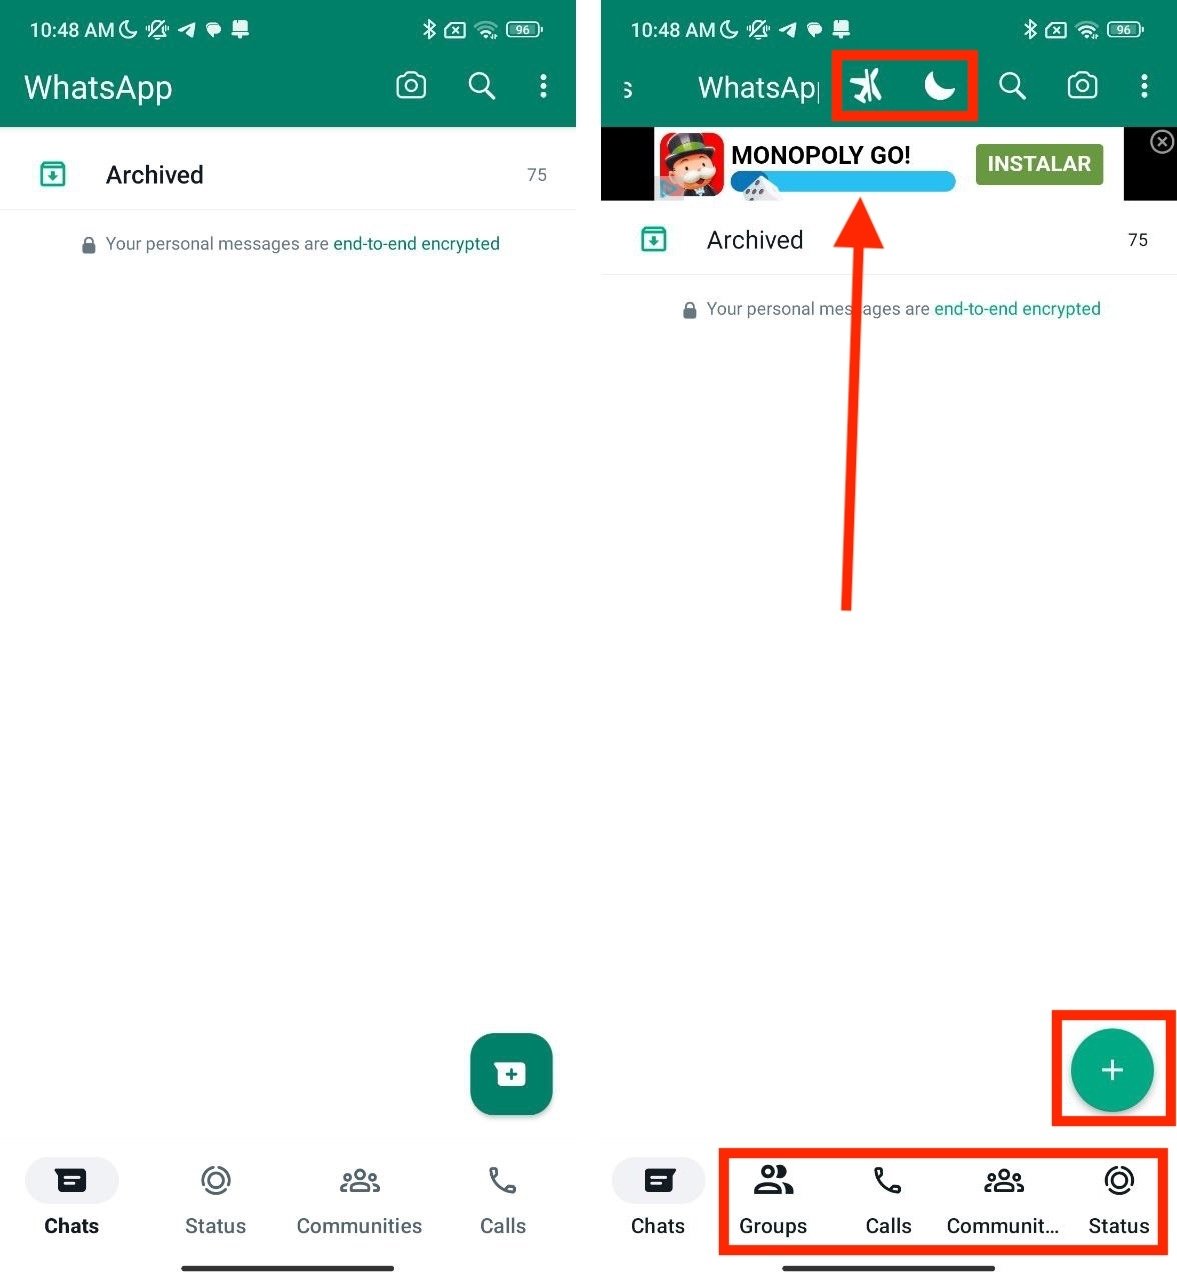 Differences between WhatsApp and WhatsApp plus on the home screen